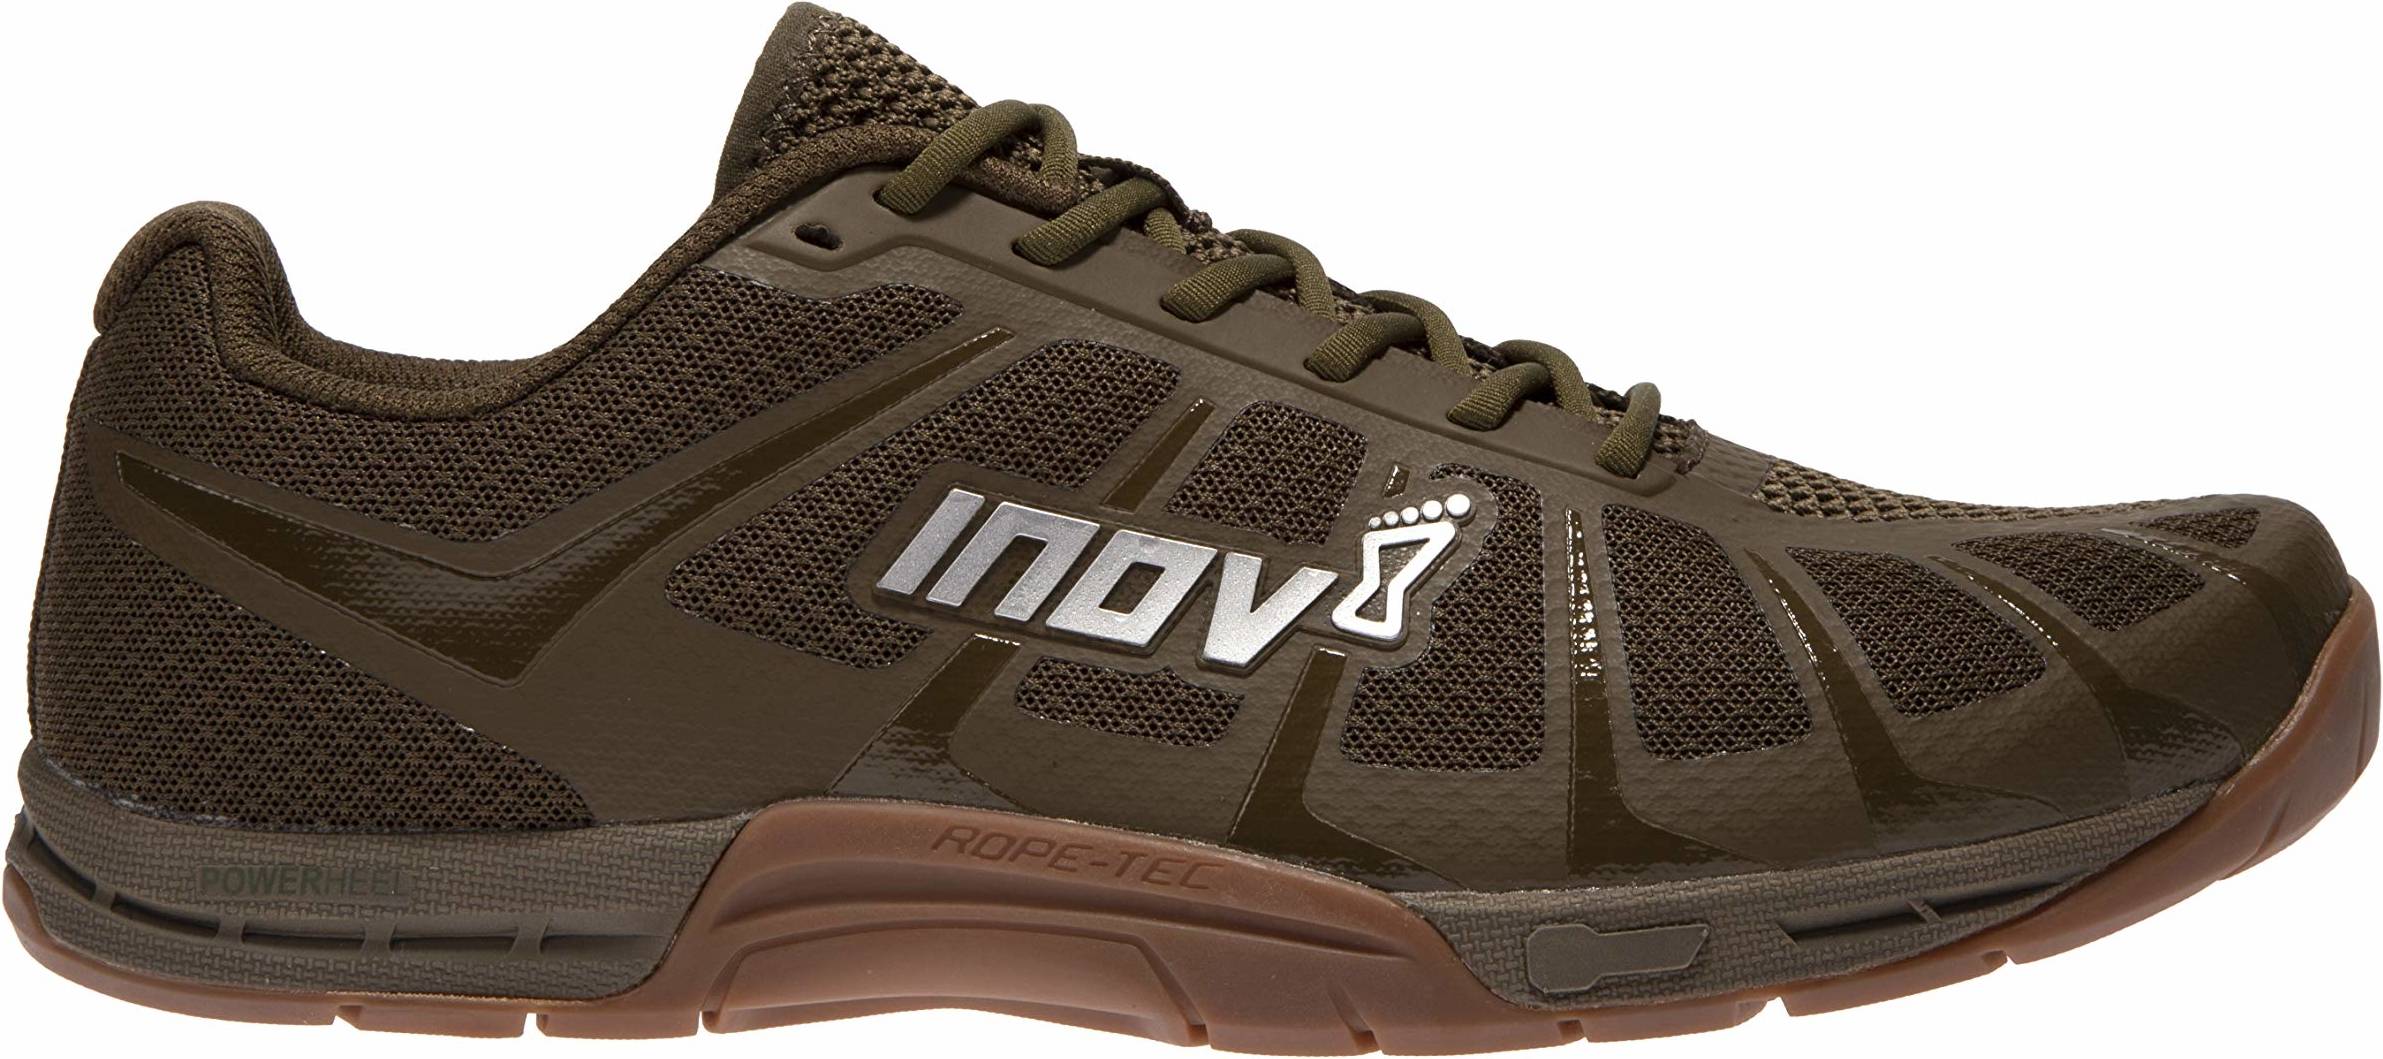 Save 55% on Lightweight Training Shoes 